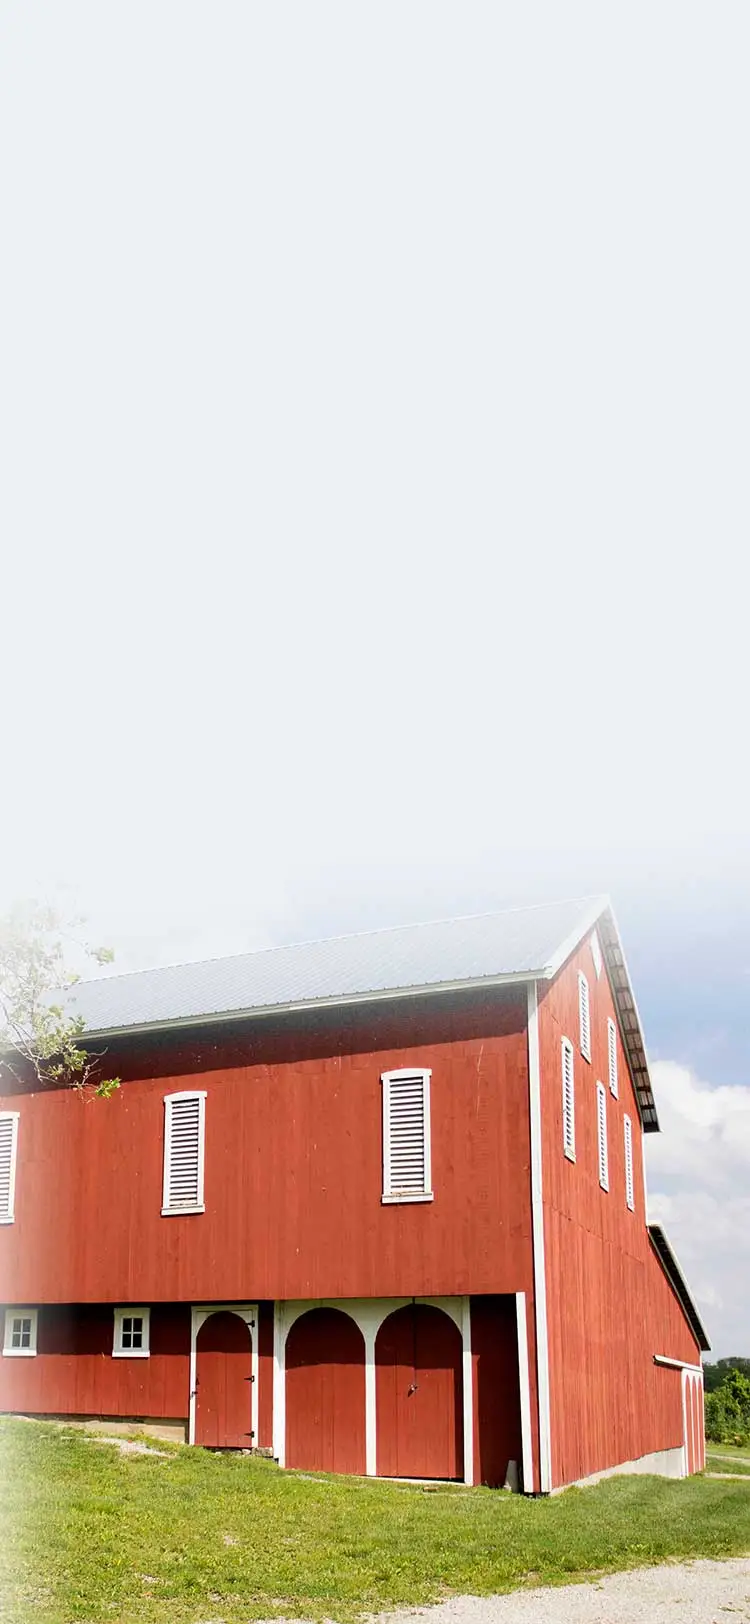 red and white barn